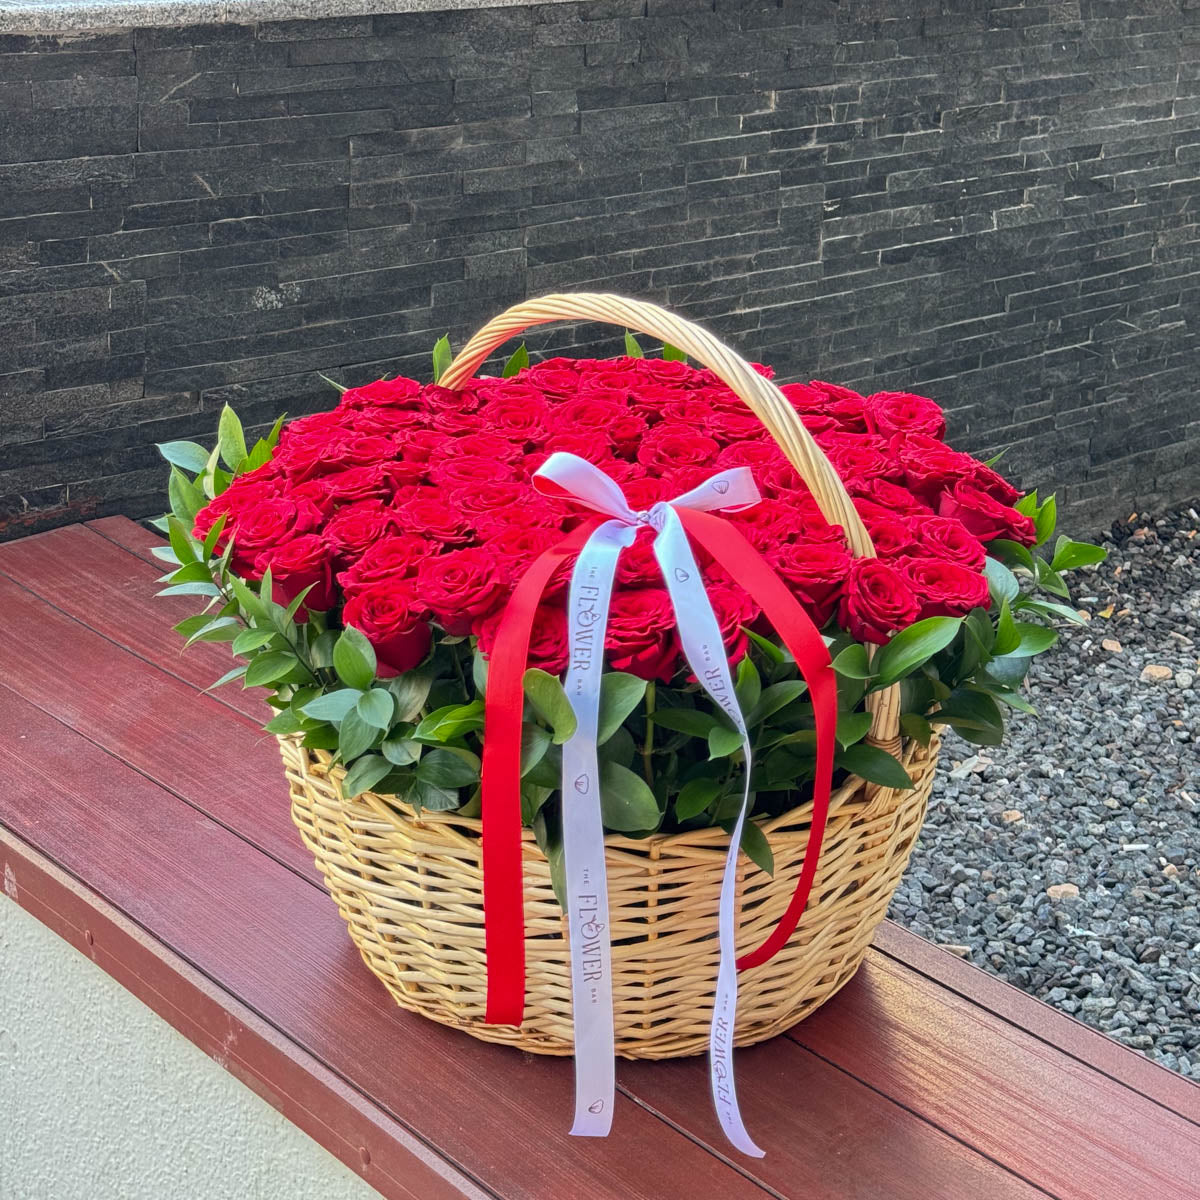 Basket of 101 Red Roses